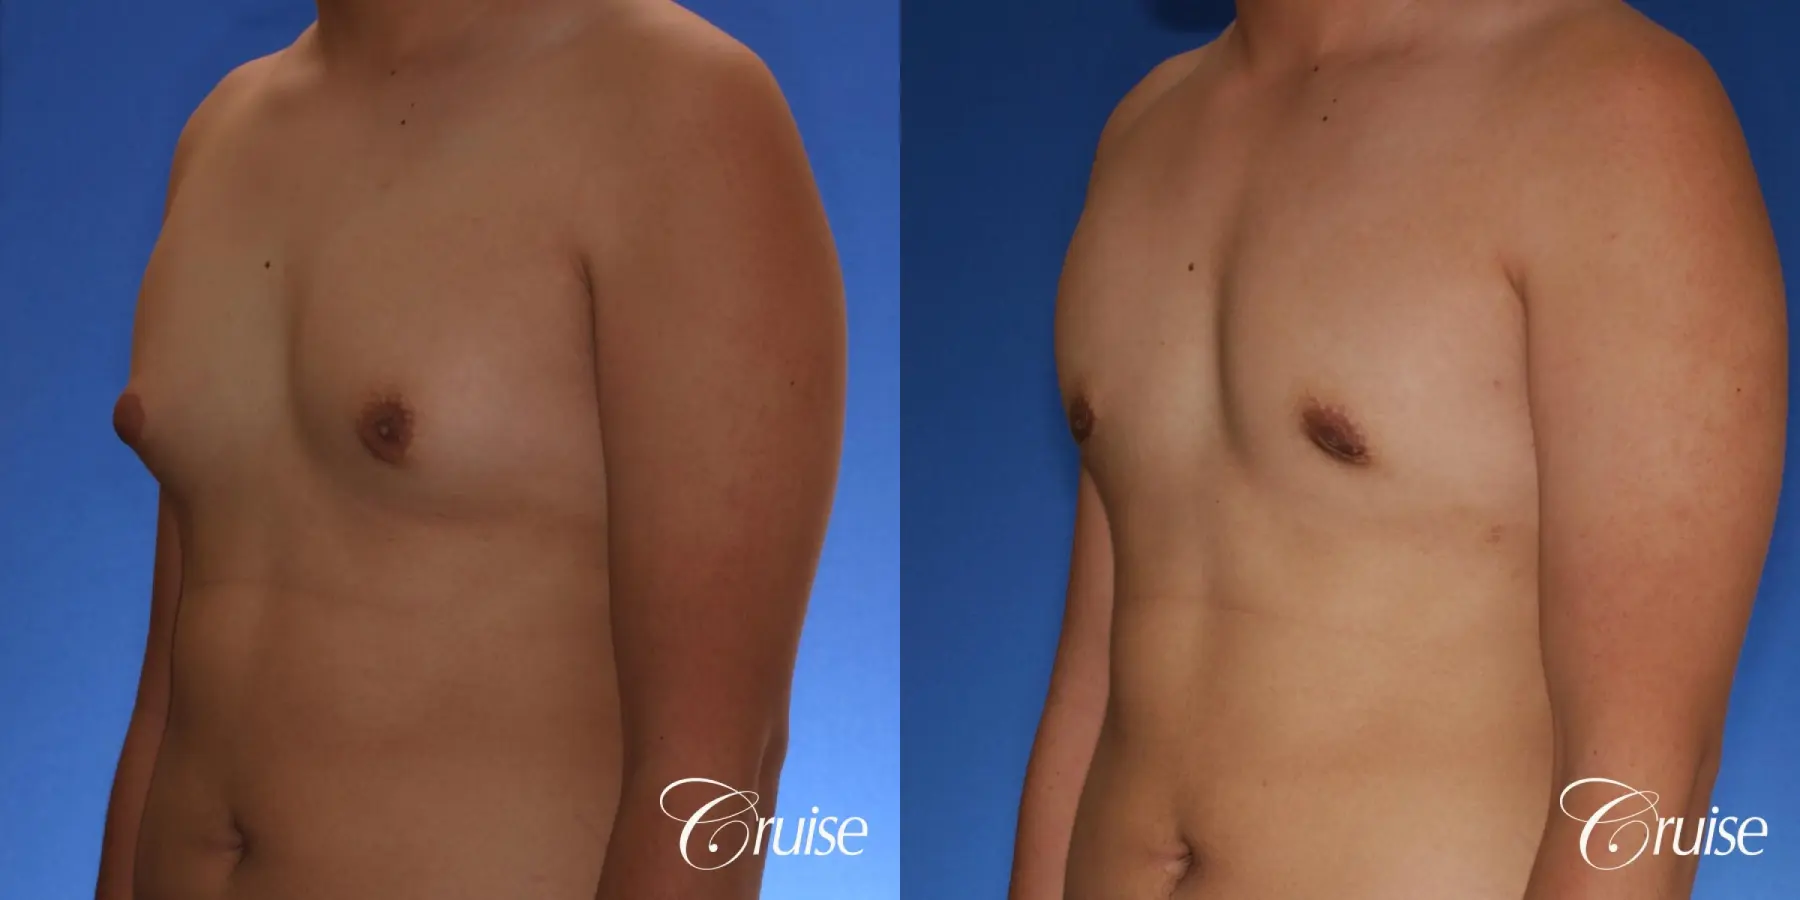 best gynecomastia surgery with plastic surgeon, Dr. Cruise - Before and After 3